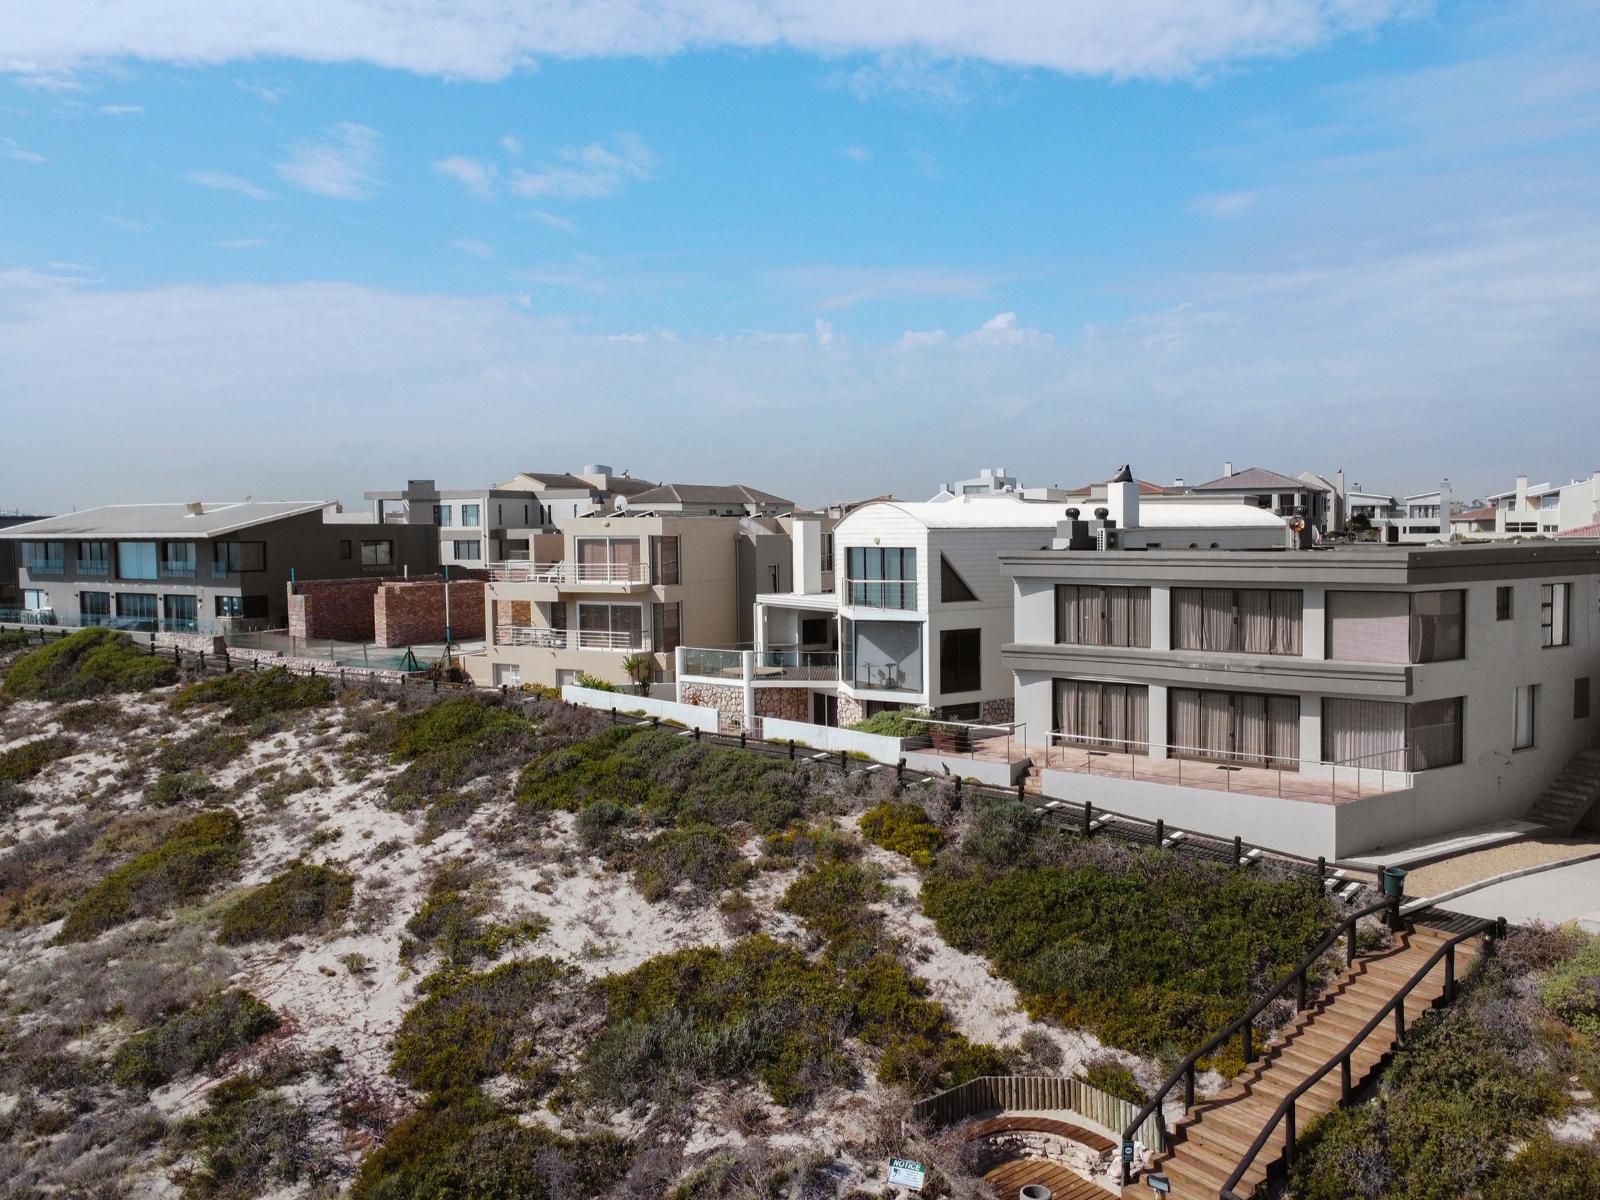 Tenos On Calypso 12 By Hostagents Calypso Beach Langebaan Western Cape South Africa House, Building, Architecture